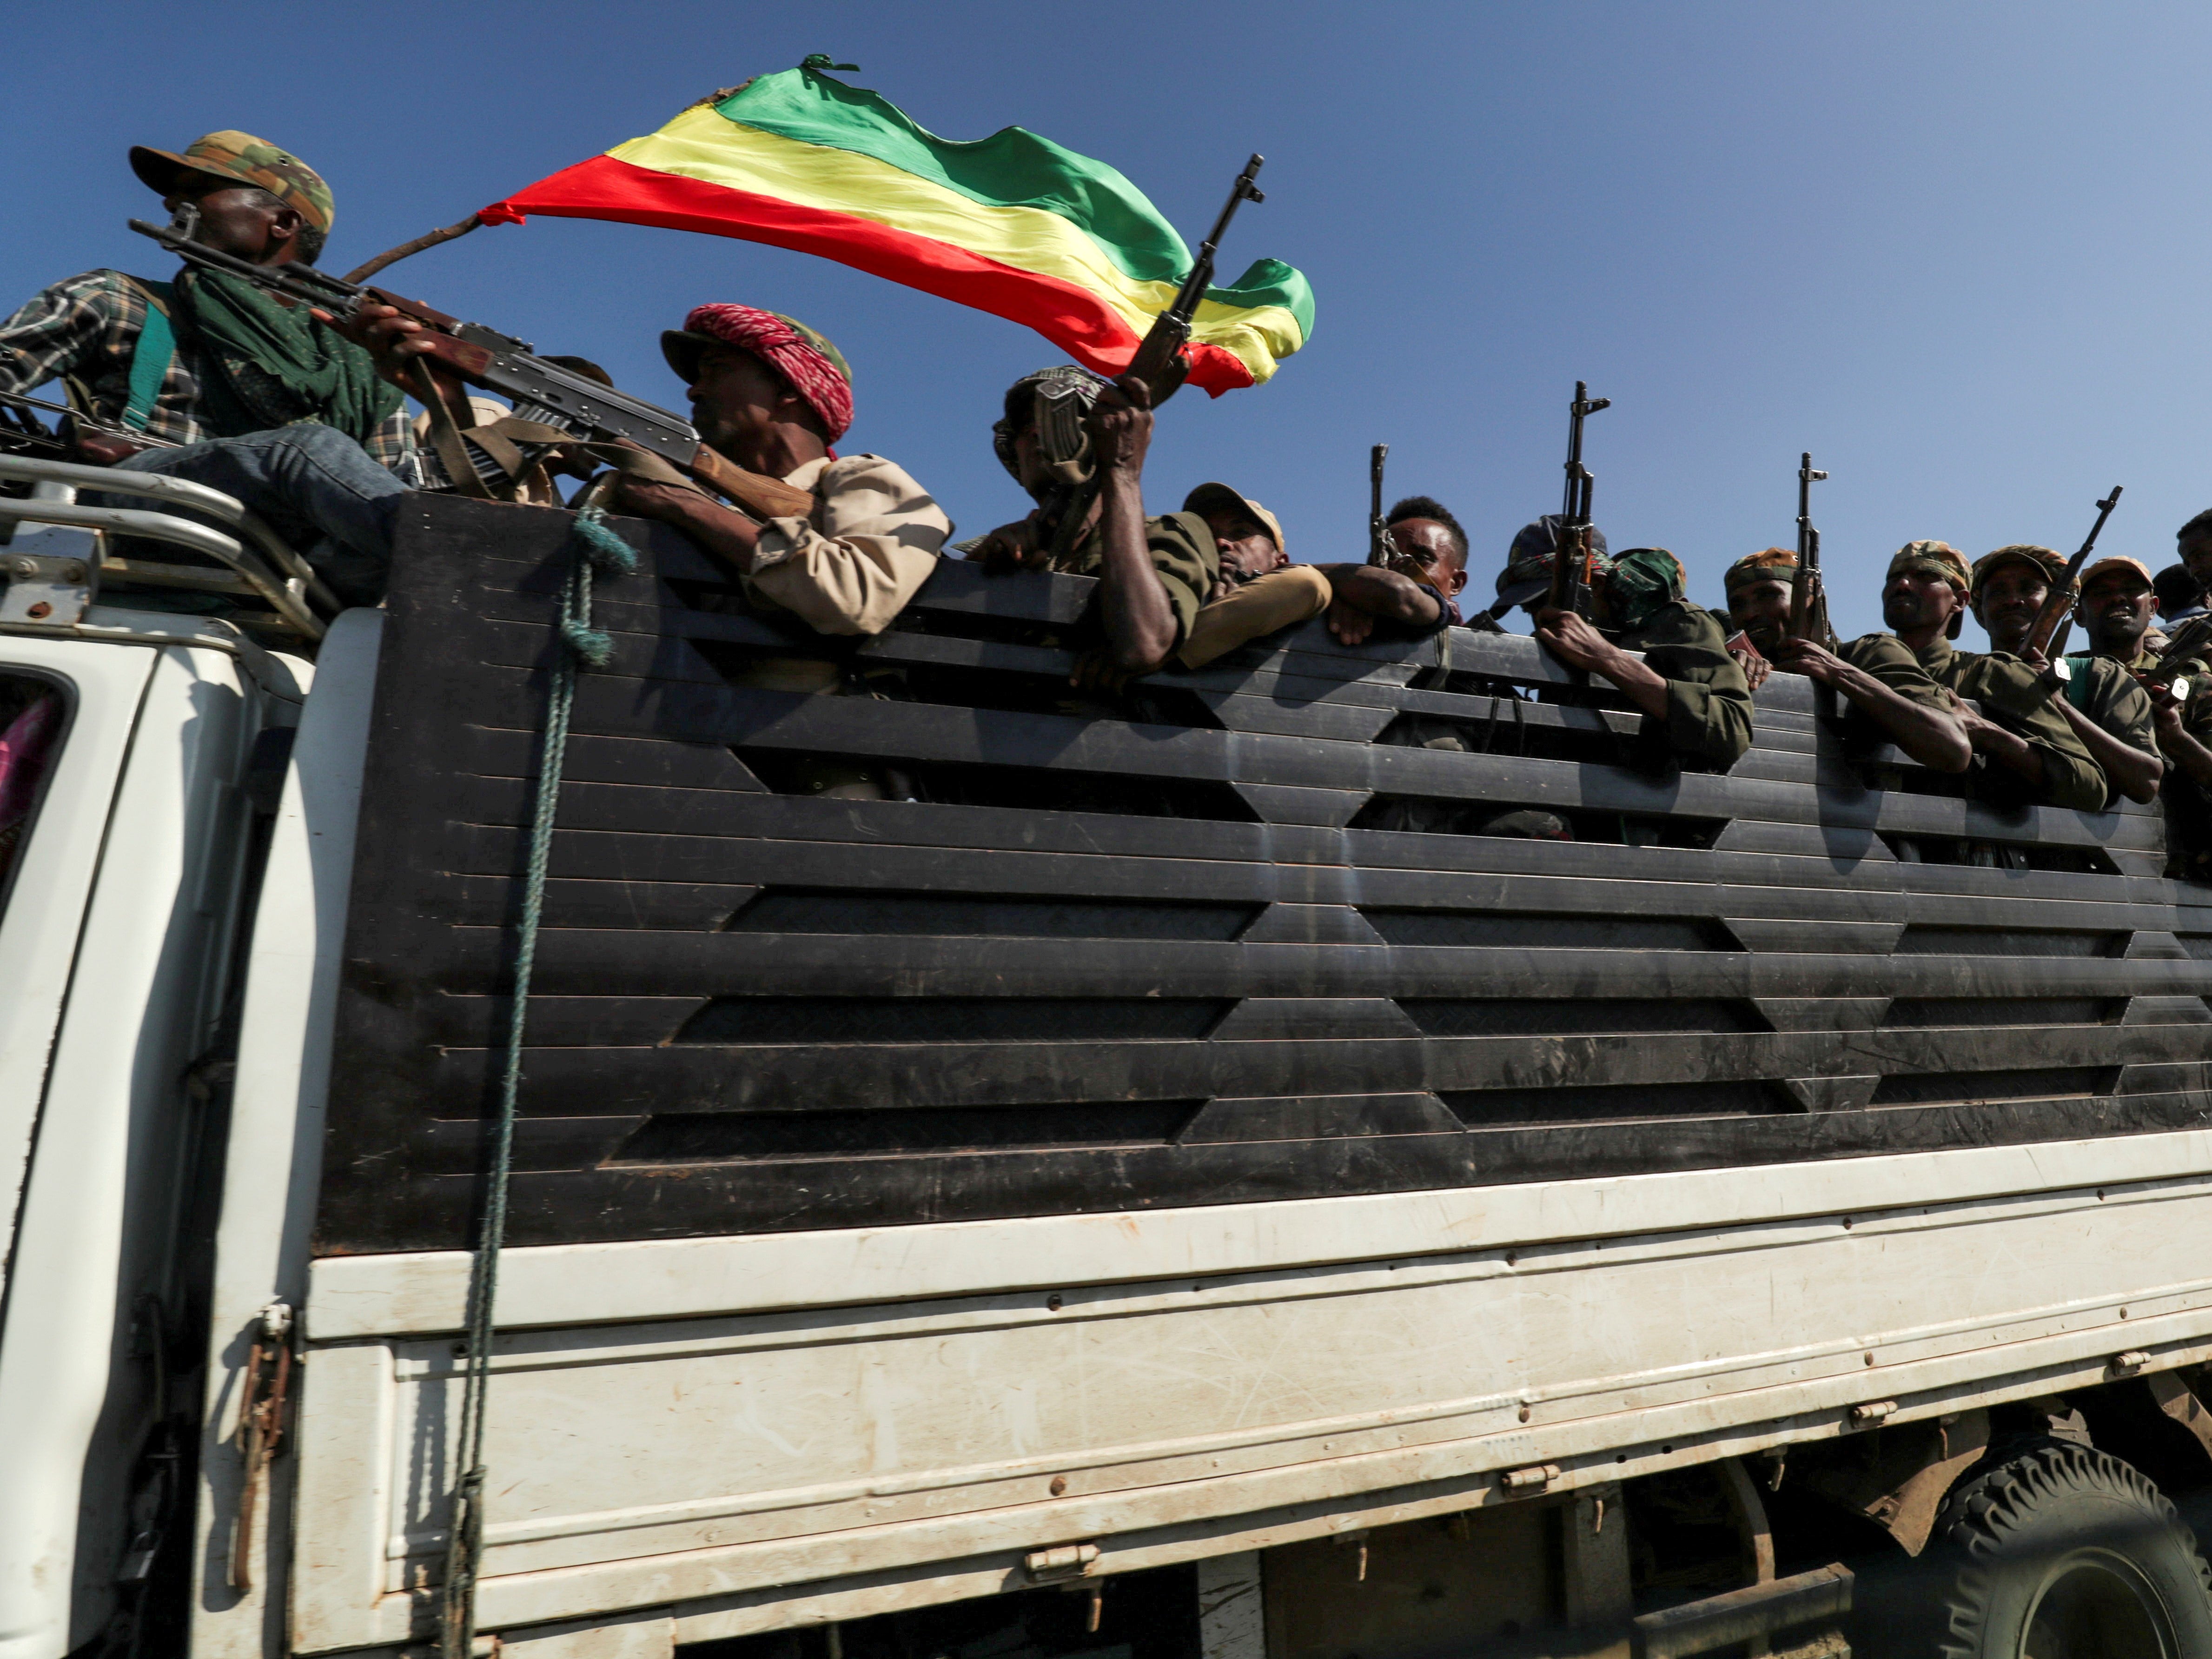 Militia forces from the Amhara region near the border with Tigray